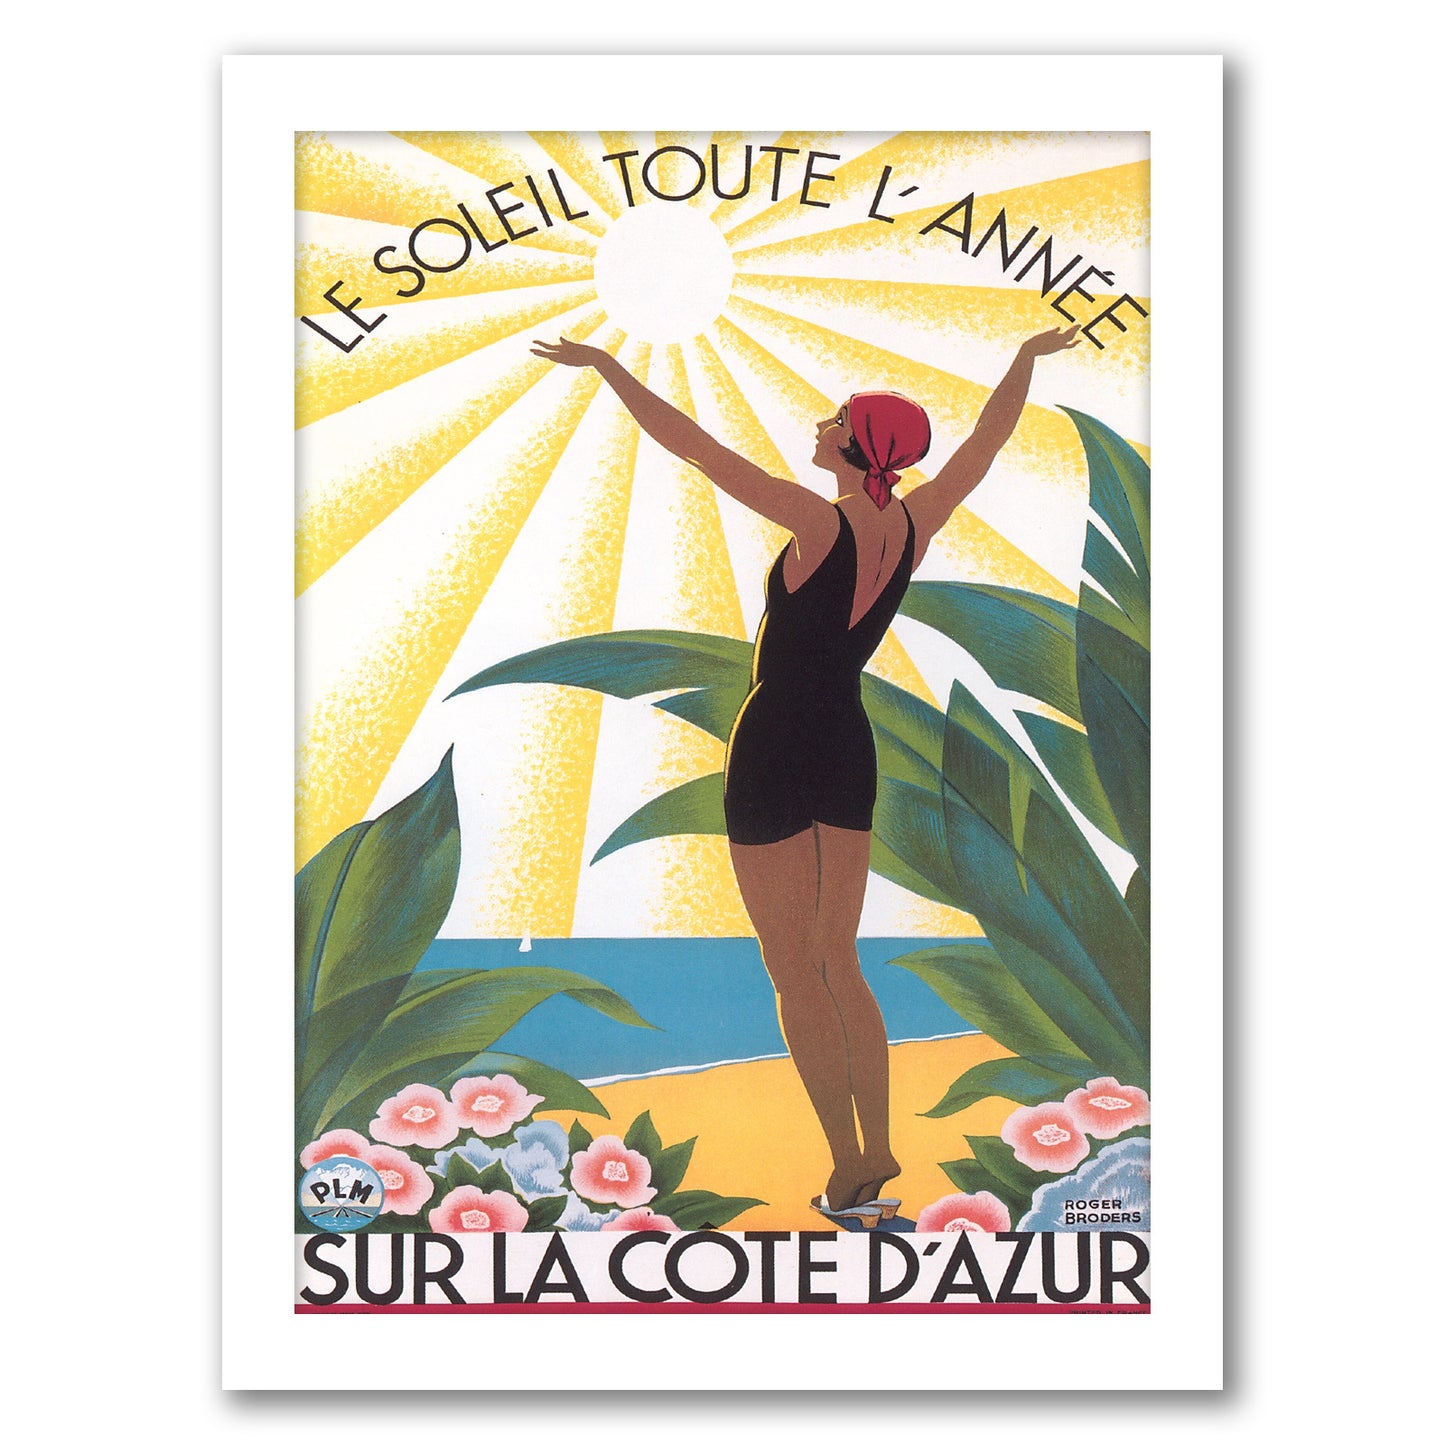 Travel Poster For Cote D Azur by Found Image Press - Framed Print